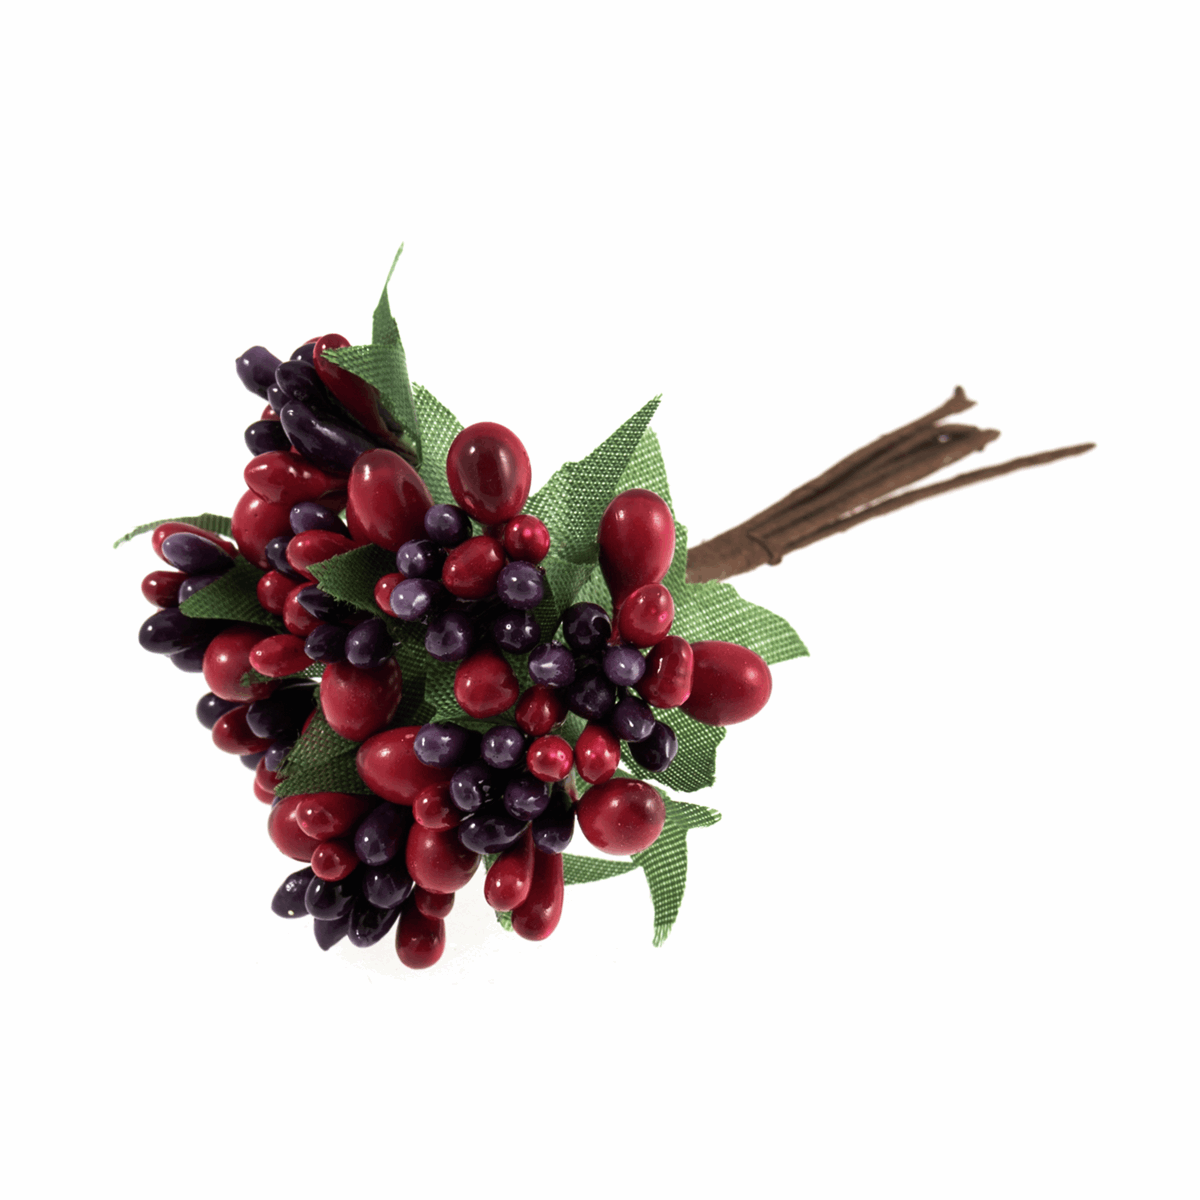 Christmas Mixed Berries - 8 Stem- 1 Piece Cluster